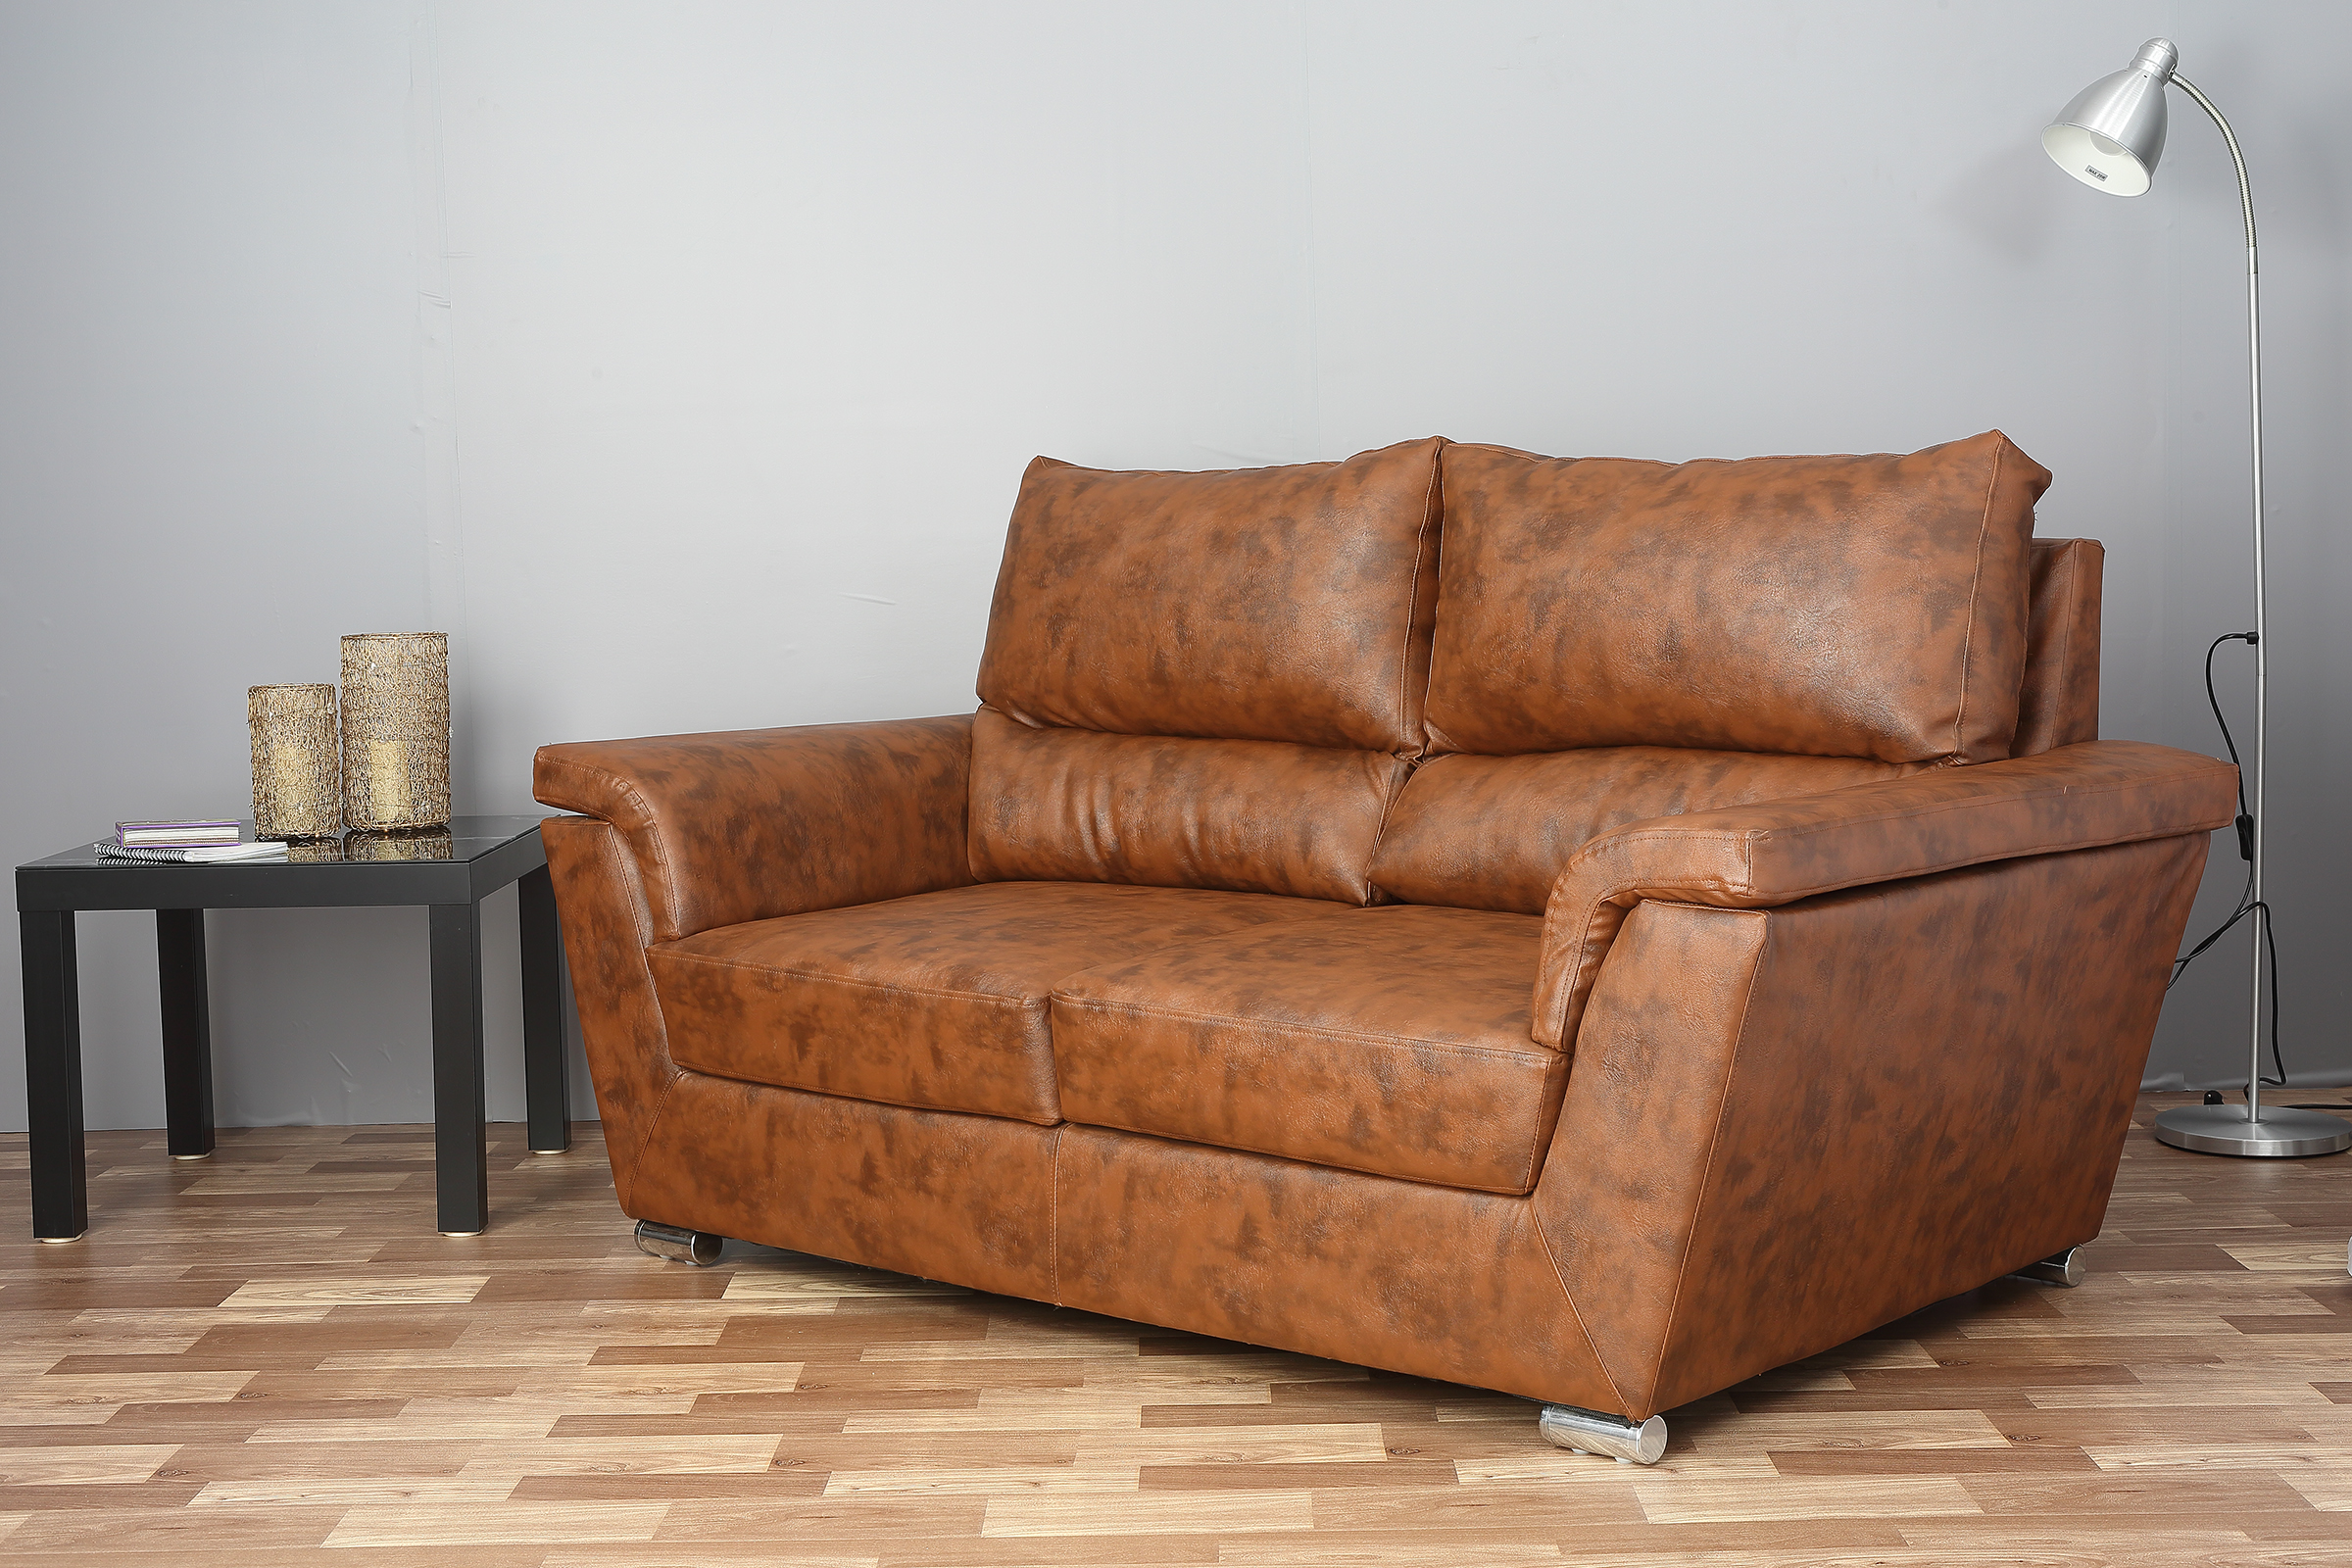 Sofa for sale in Hyderabad